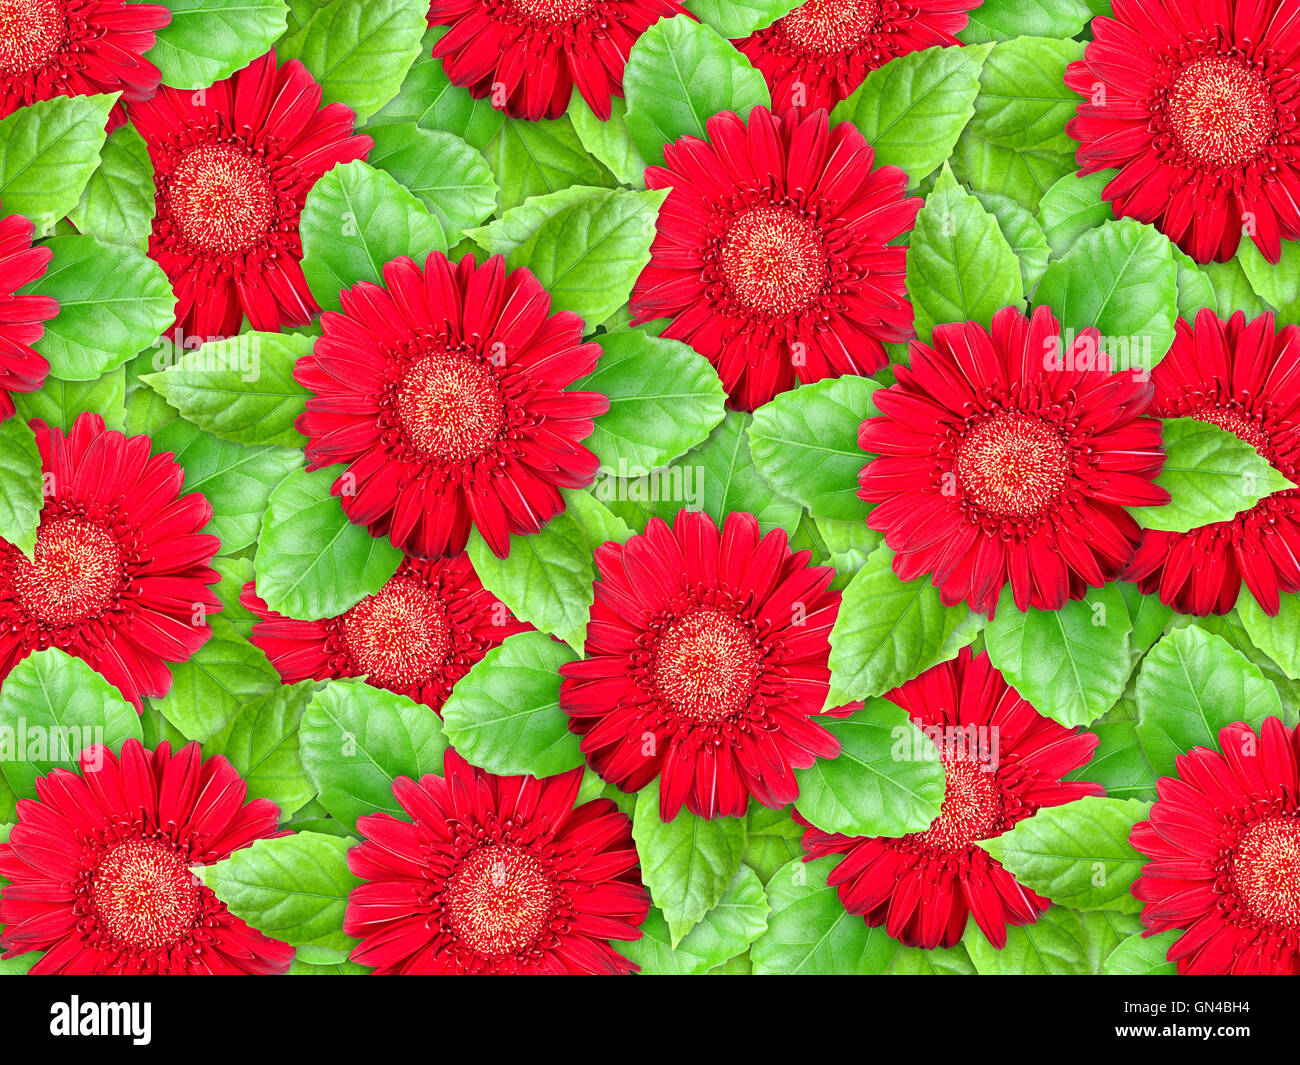 Background of red flowers and green leaf Stock Photo